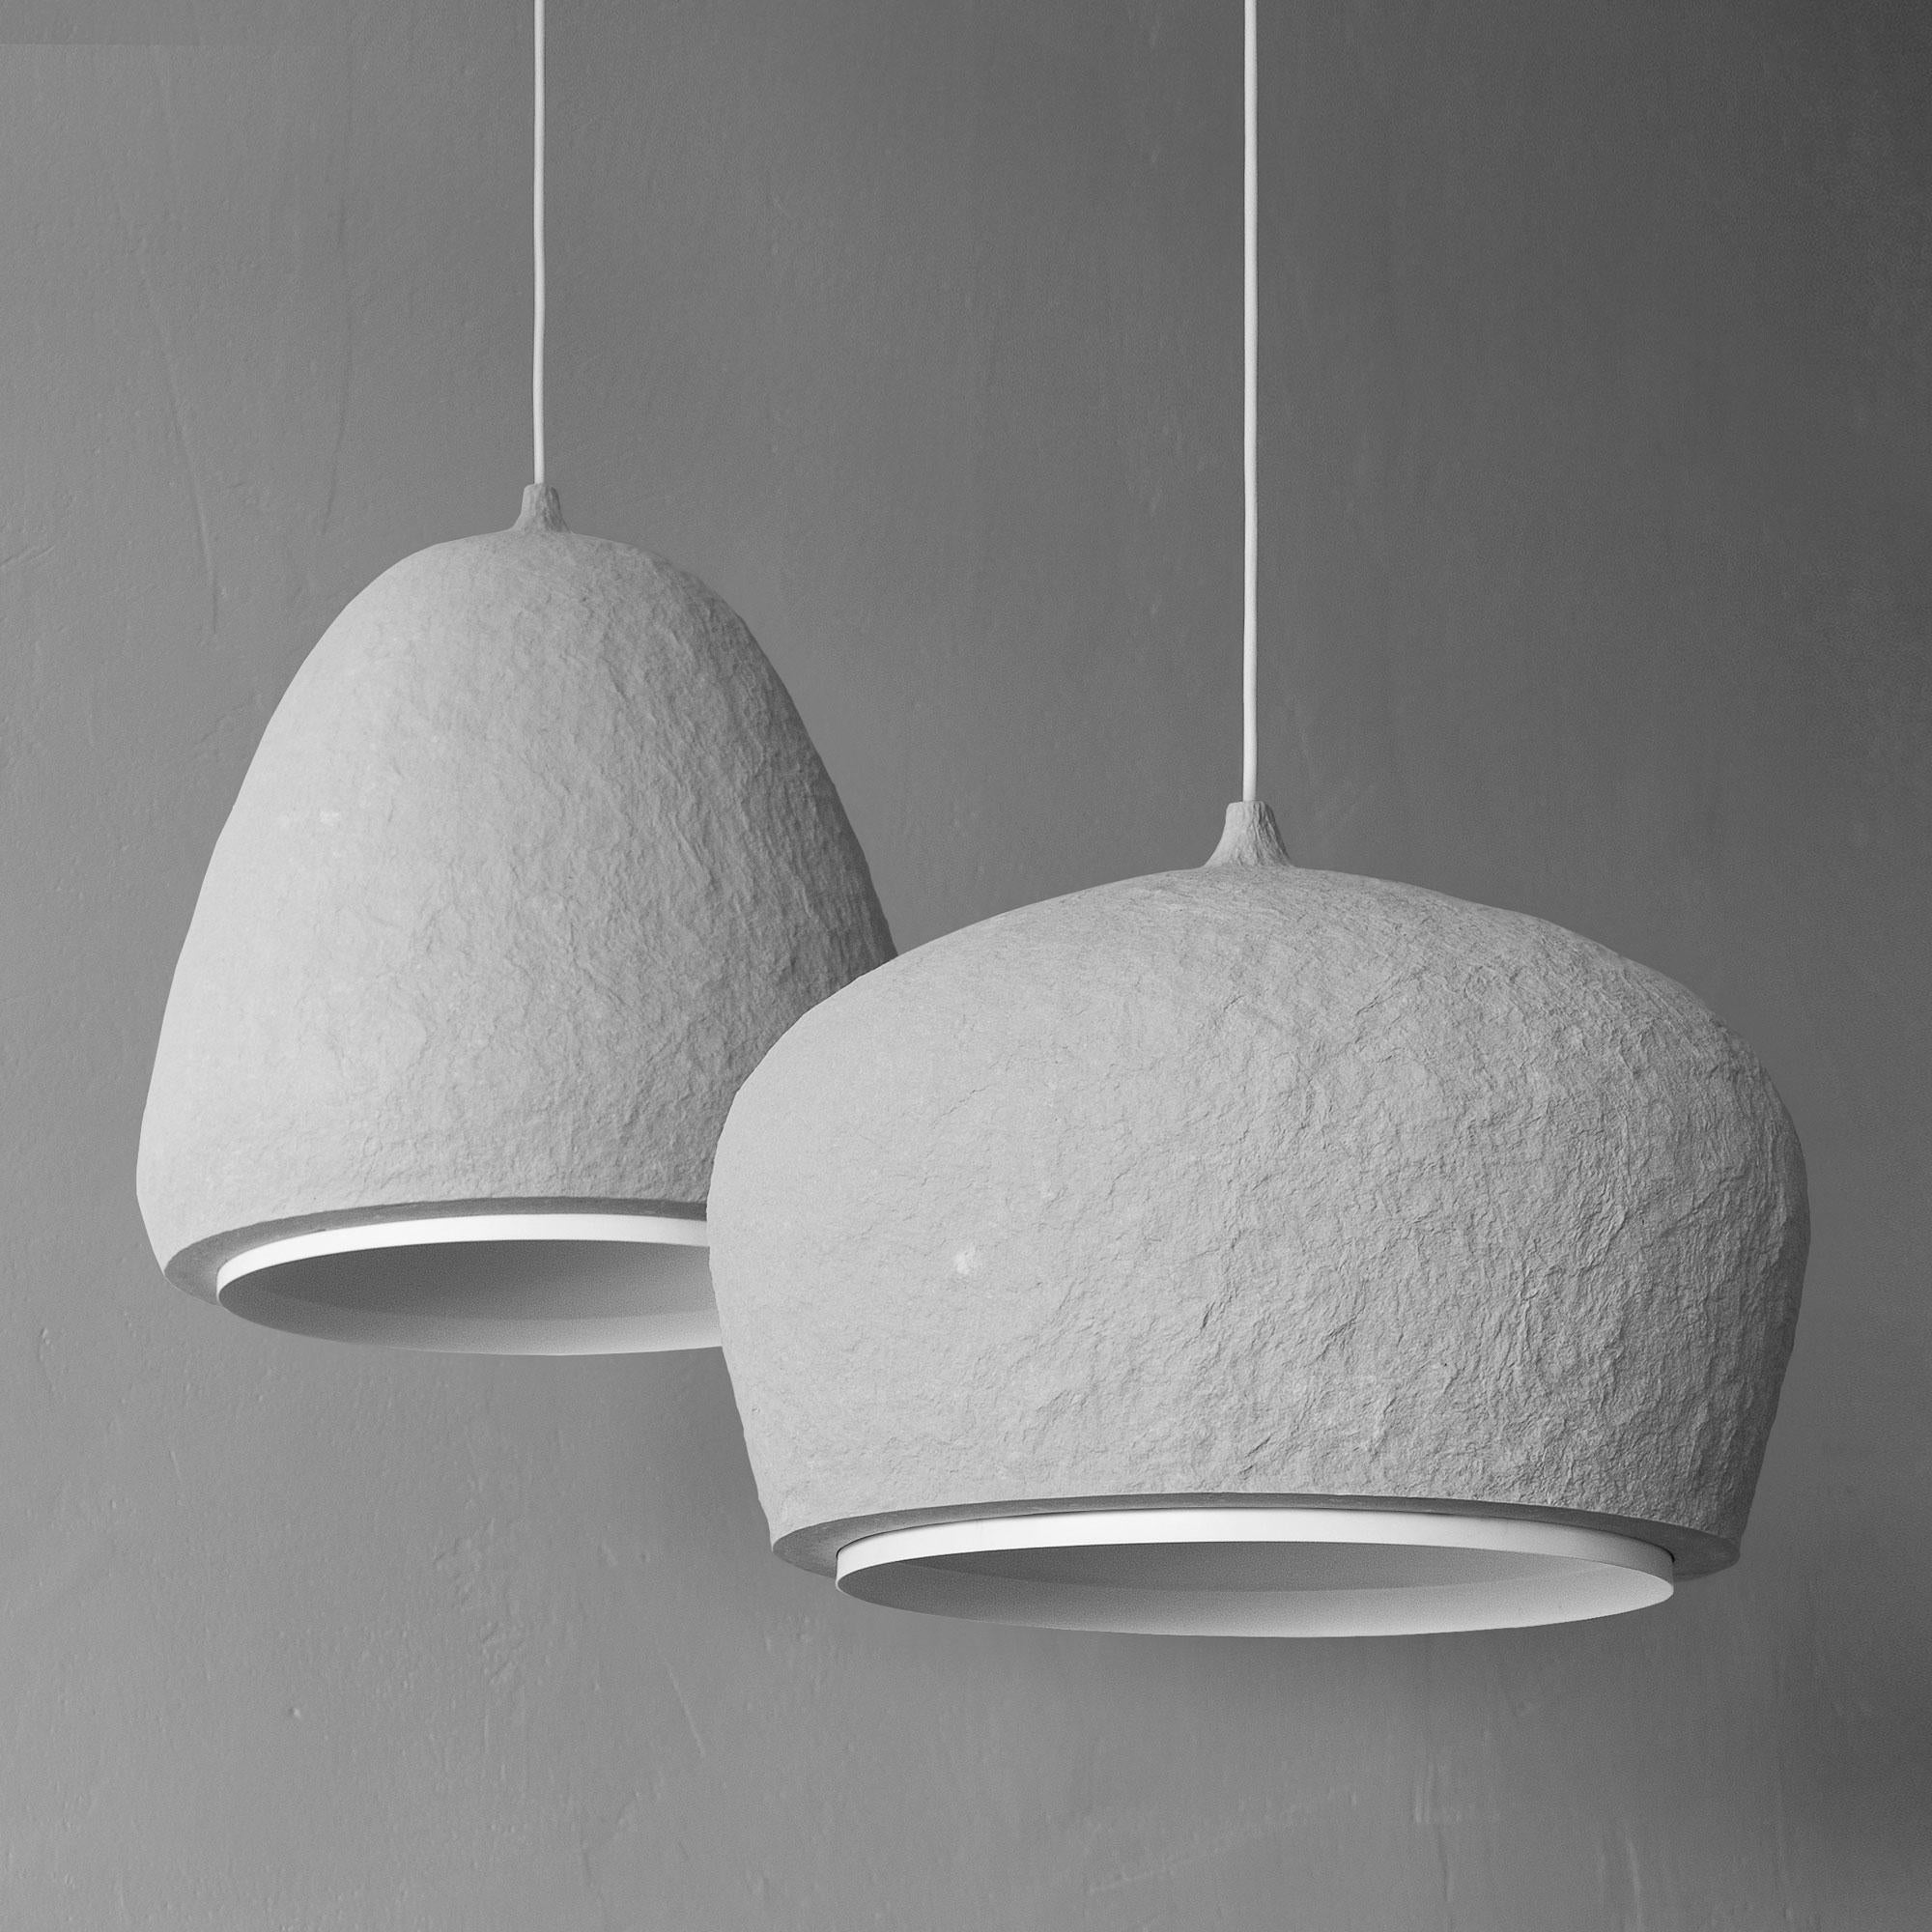 Hand-Crafted Gray Industrial Pendant Lamp, Minimalist Lighting by Donatas Žukauskas In Stock For Sale